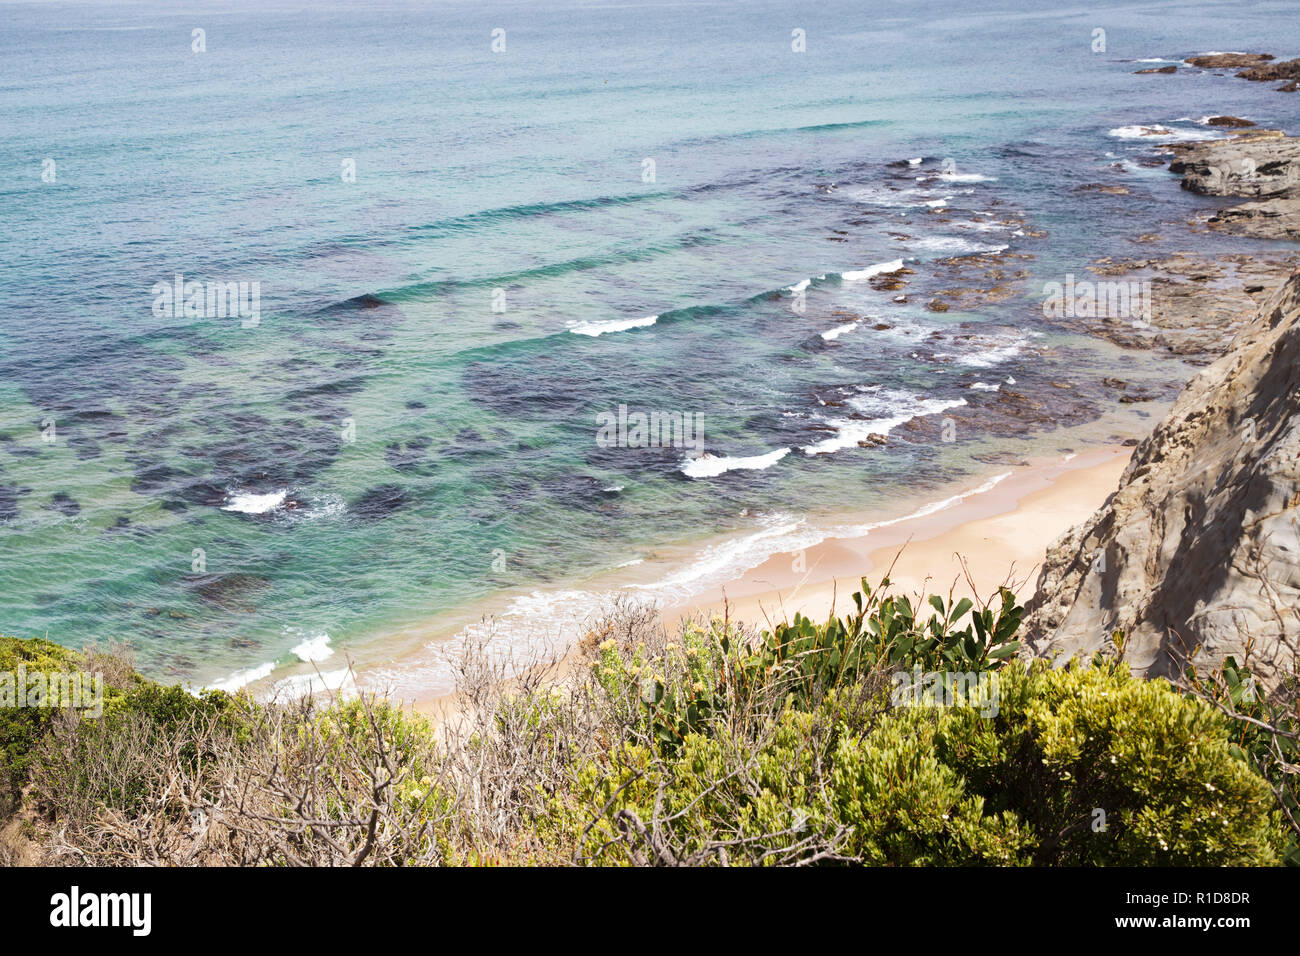 View of Australian beaches and ocean from above. Stock Photo